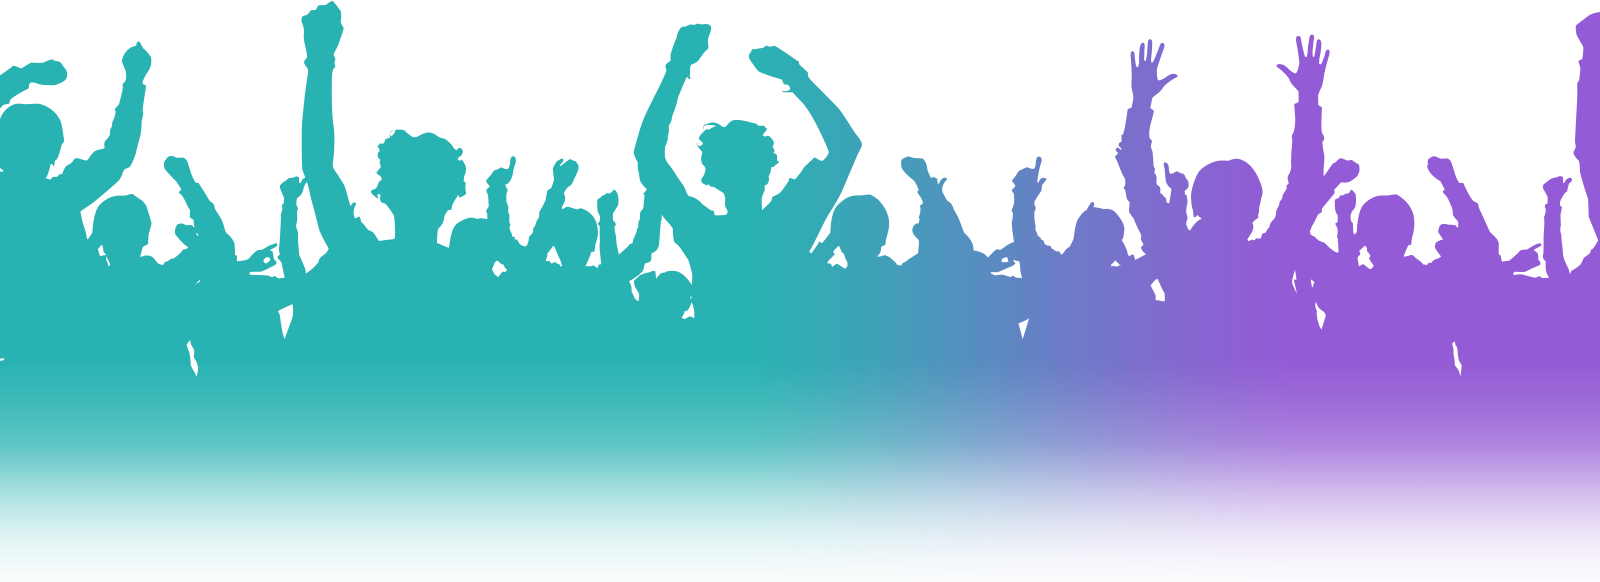 Download PNG image - Crowd PNG Clipart 